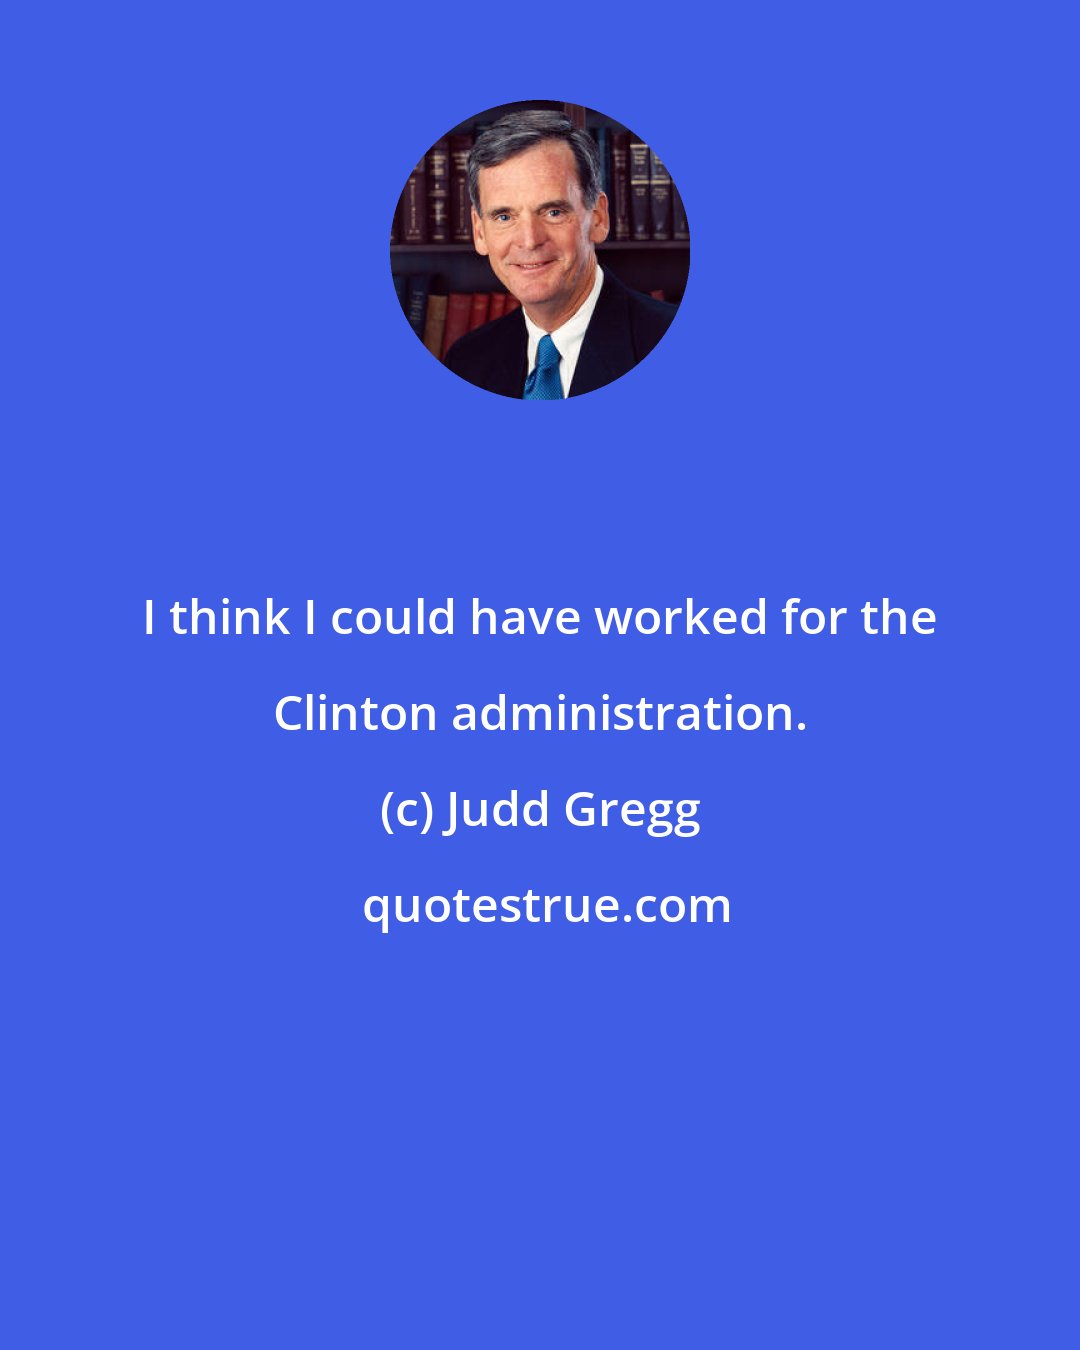 Judd Gregg: I think I could have worked for the Clinton administration.